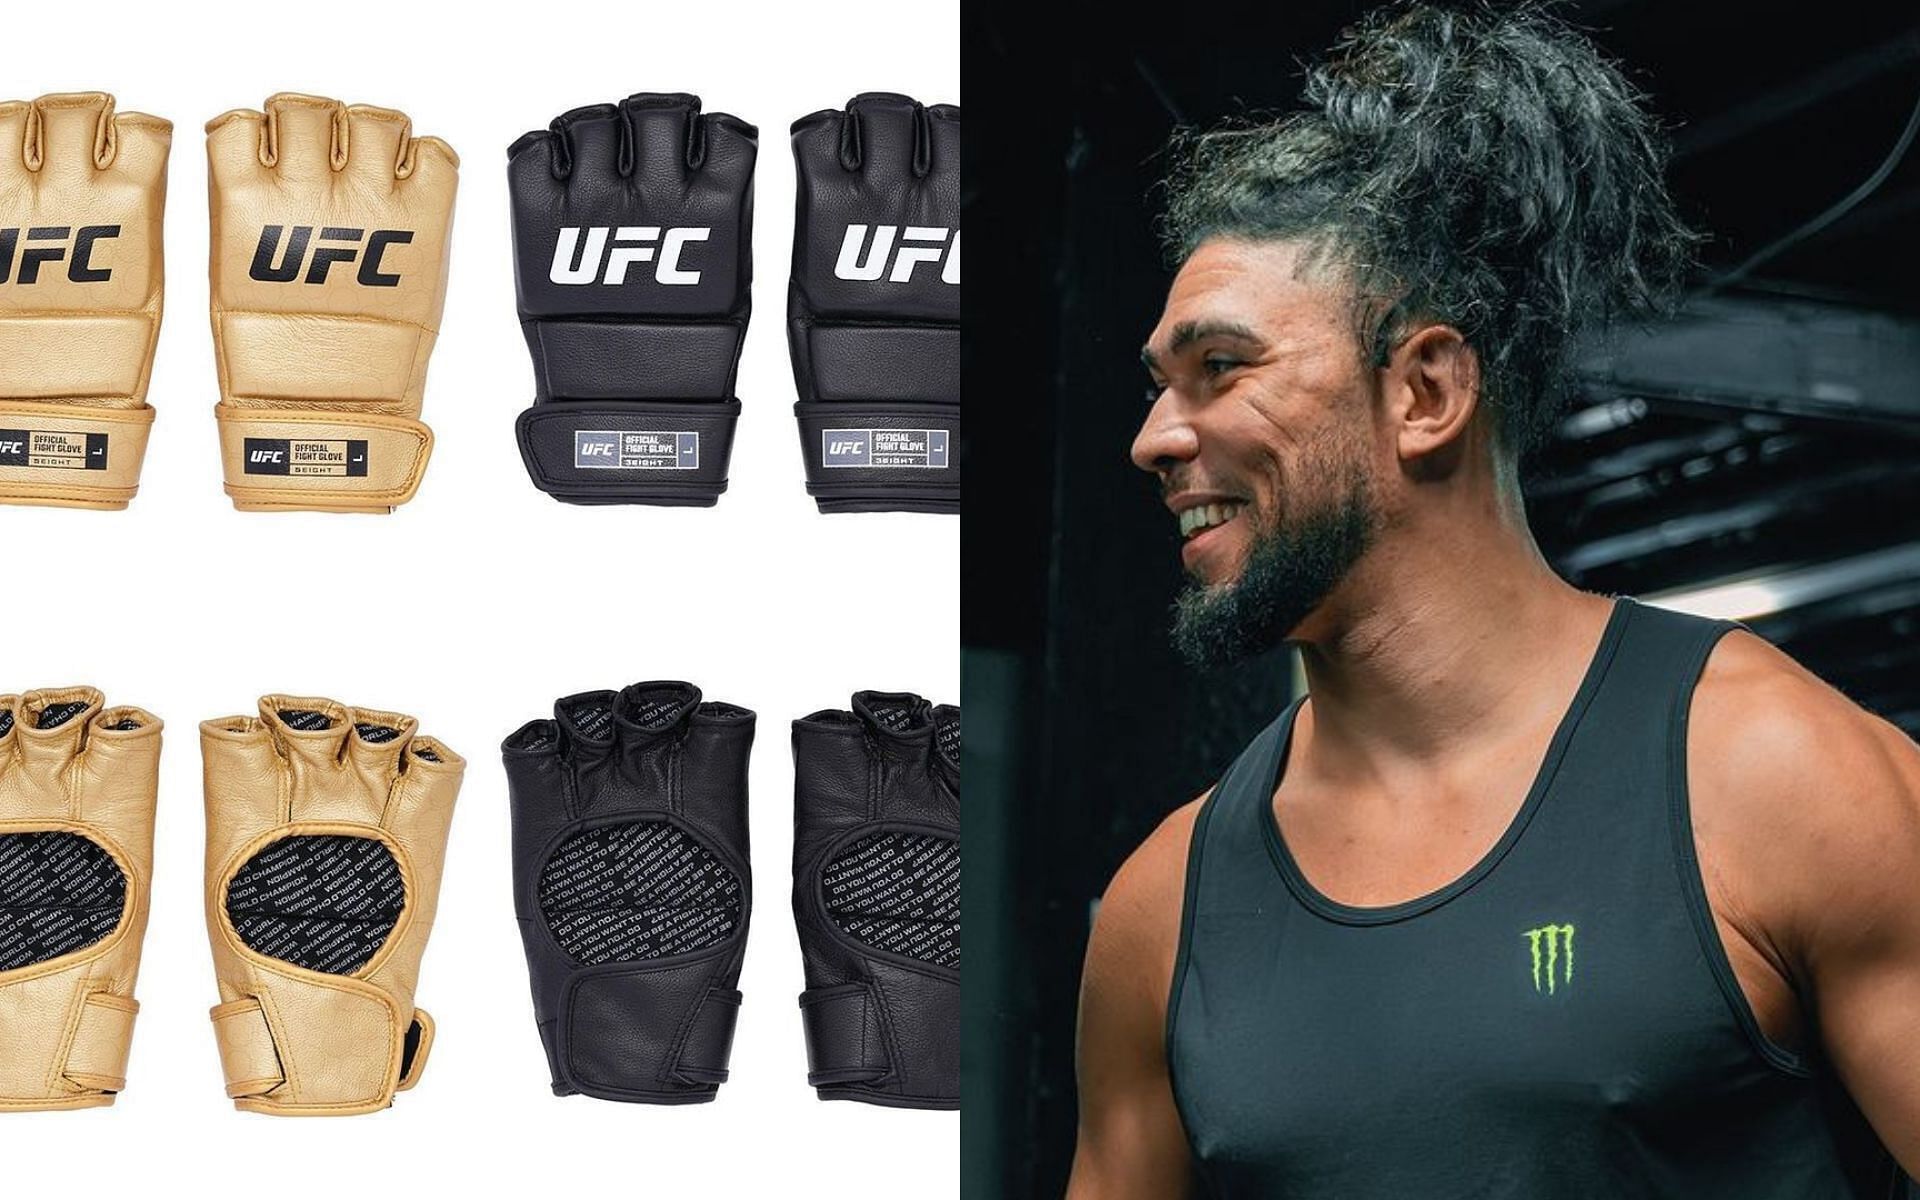 New UFC gloves (left) is a big hit with Johnny Walker (right) [Images courtesy of @ufc and johnnywalker on Instagram]